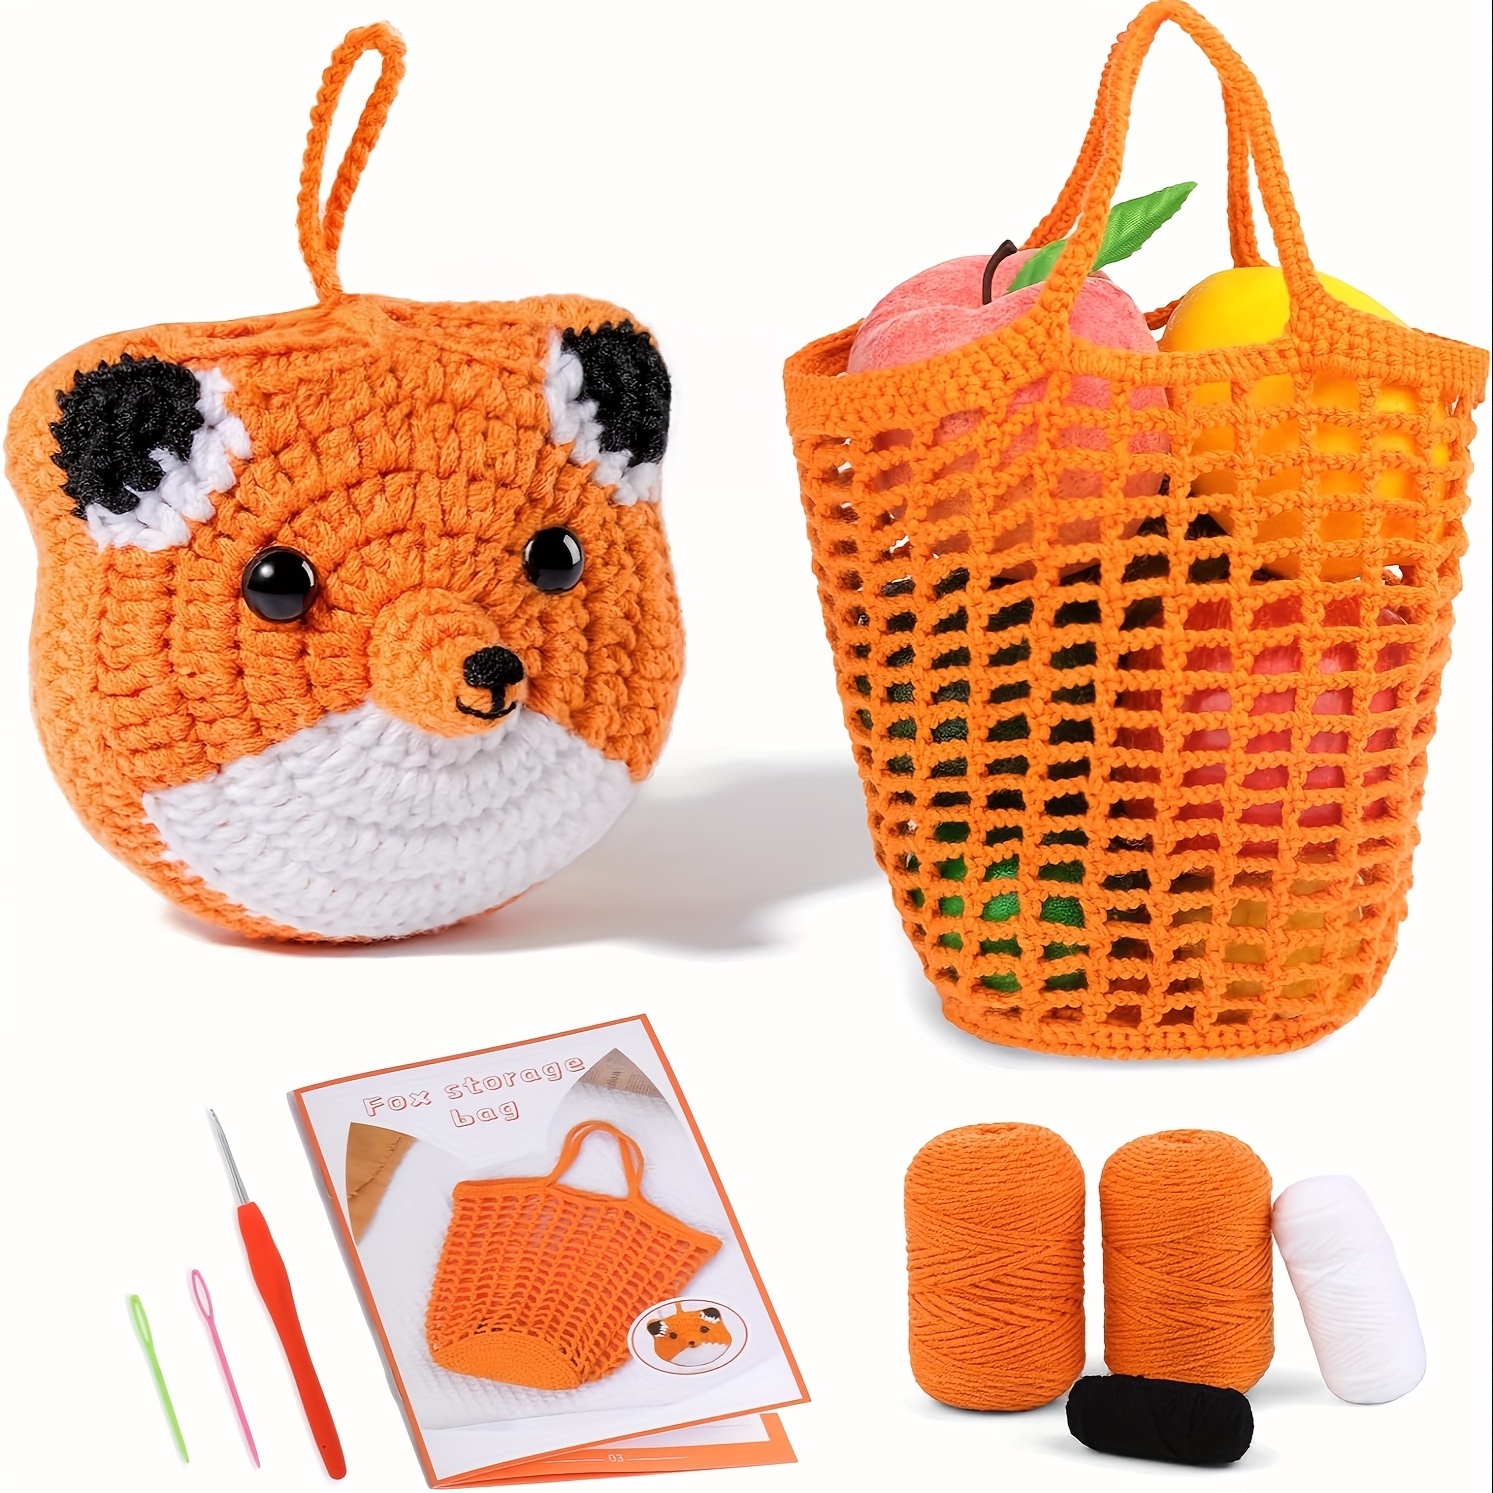 

Diy Crochet Fox Shoulder Bag Kit For Beginners - Complete Starter Set With Yarn, Step-by-step Instructions & Craft Supplies